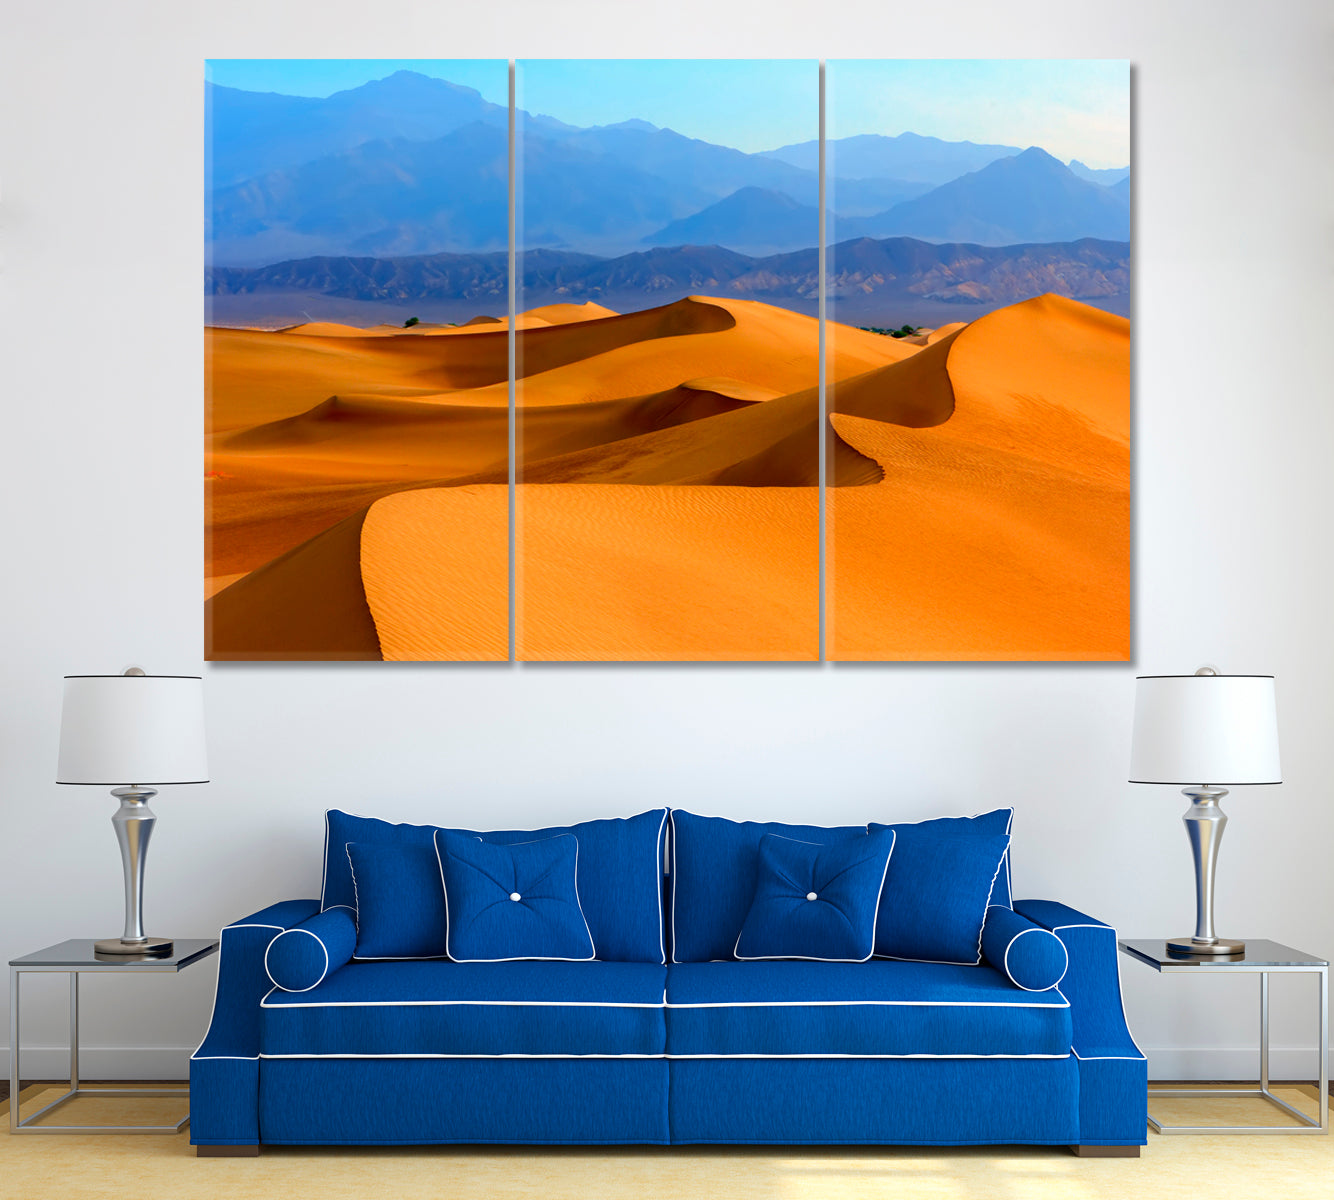 Sand dunes in Death Valley California Canvas Print ArtLexy 3 Panels 36"x24" inches 